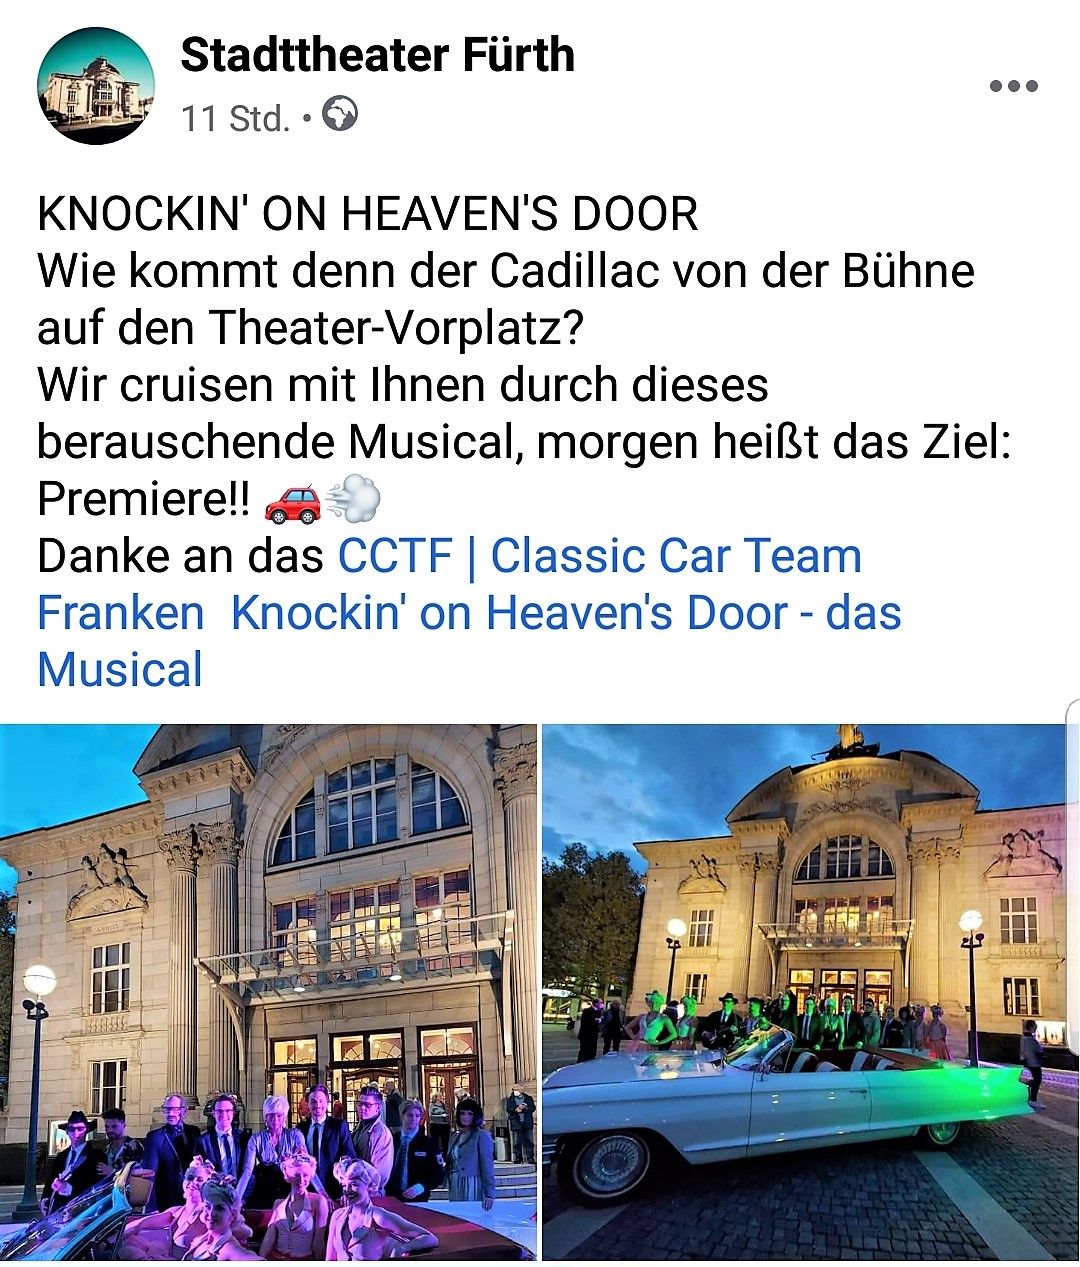 cctf-musical-premiere-fuerth-2021-010